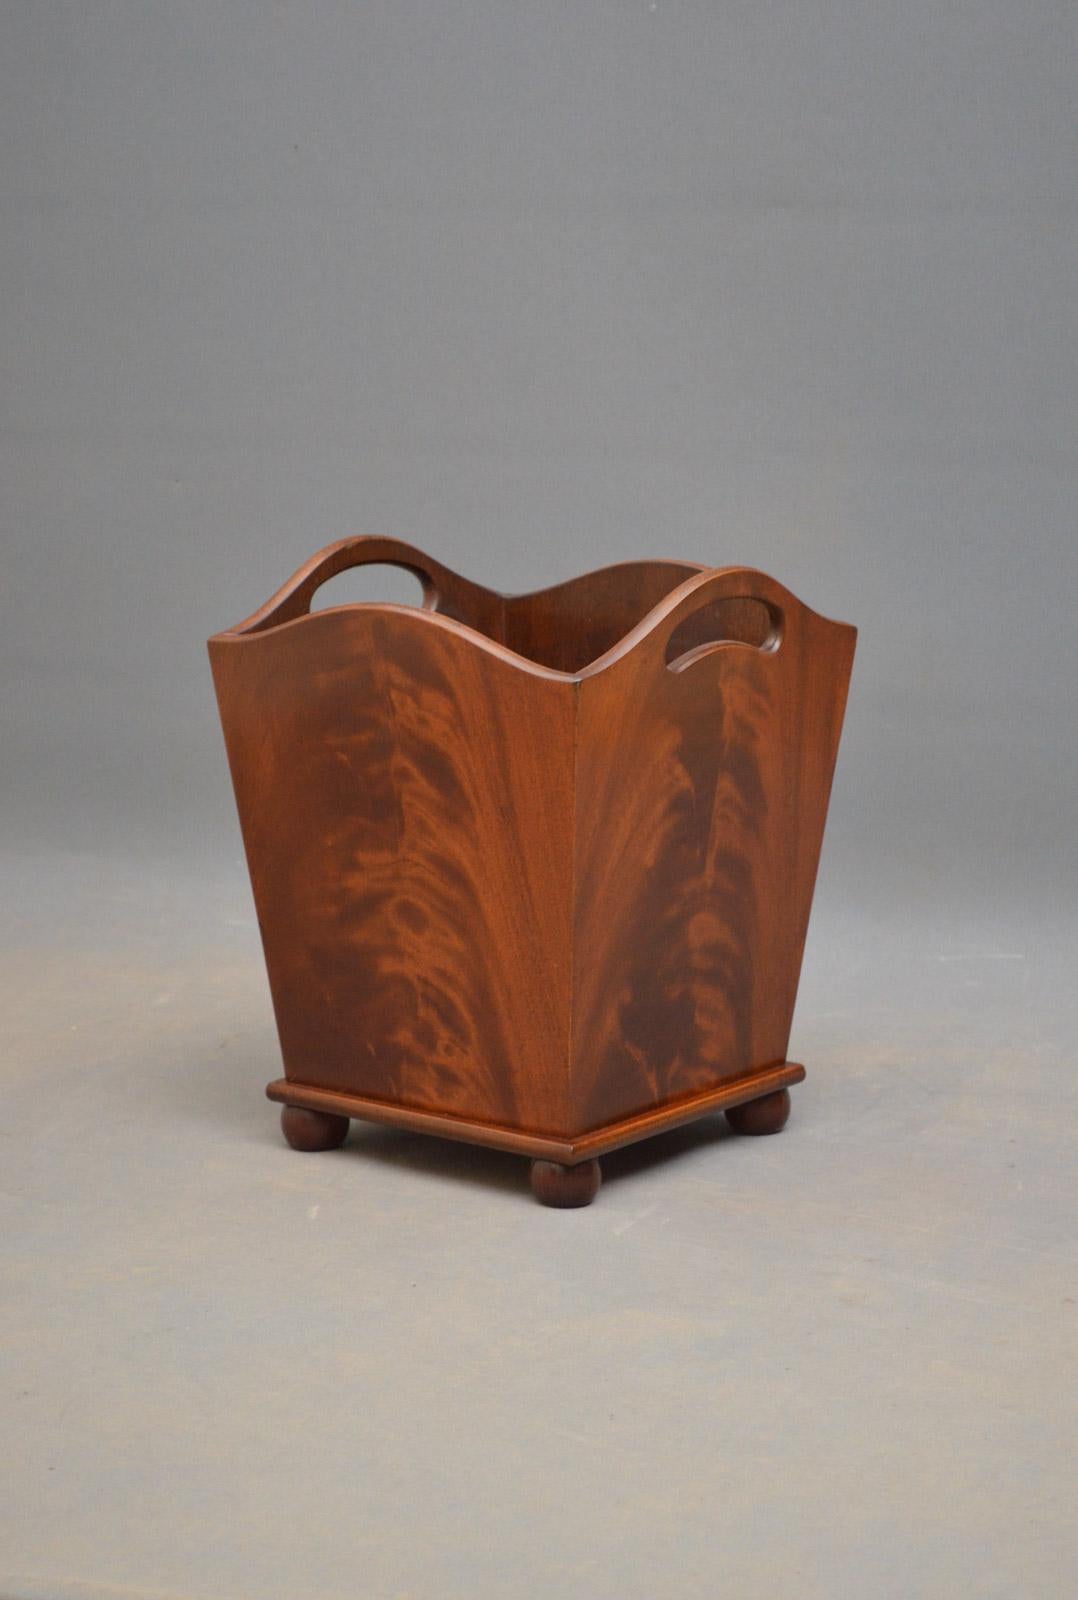 Sn3281, very rare Edwardian, flamed mahogany waste paper bin with kidney shaped handles, tapering sides and bun feet. This attractive bin has replacement liner and it would make a fantastic planter, jardinière. All in excellent condition throughout,